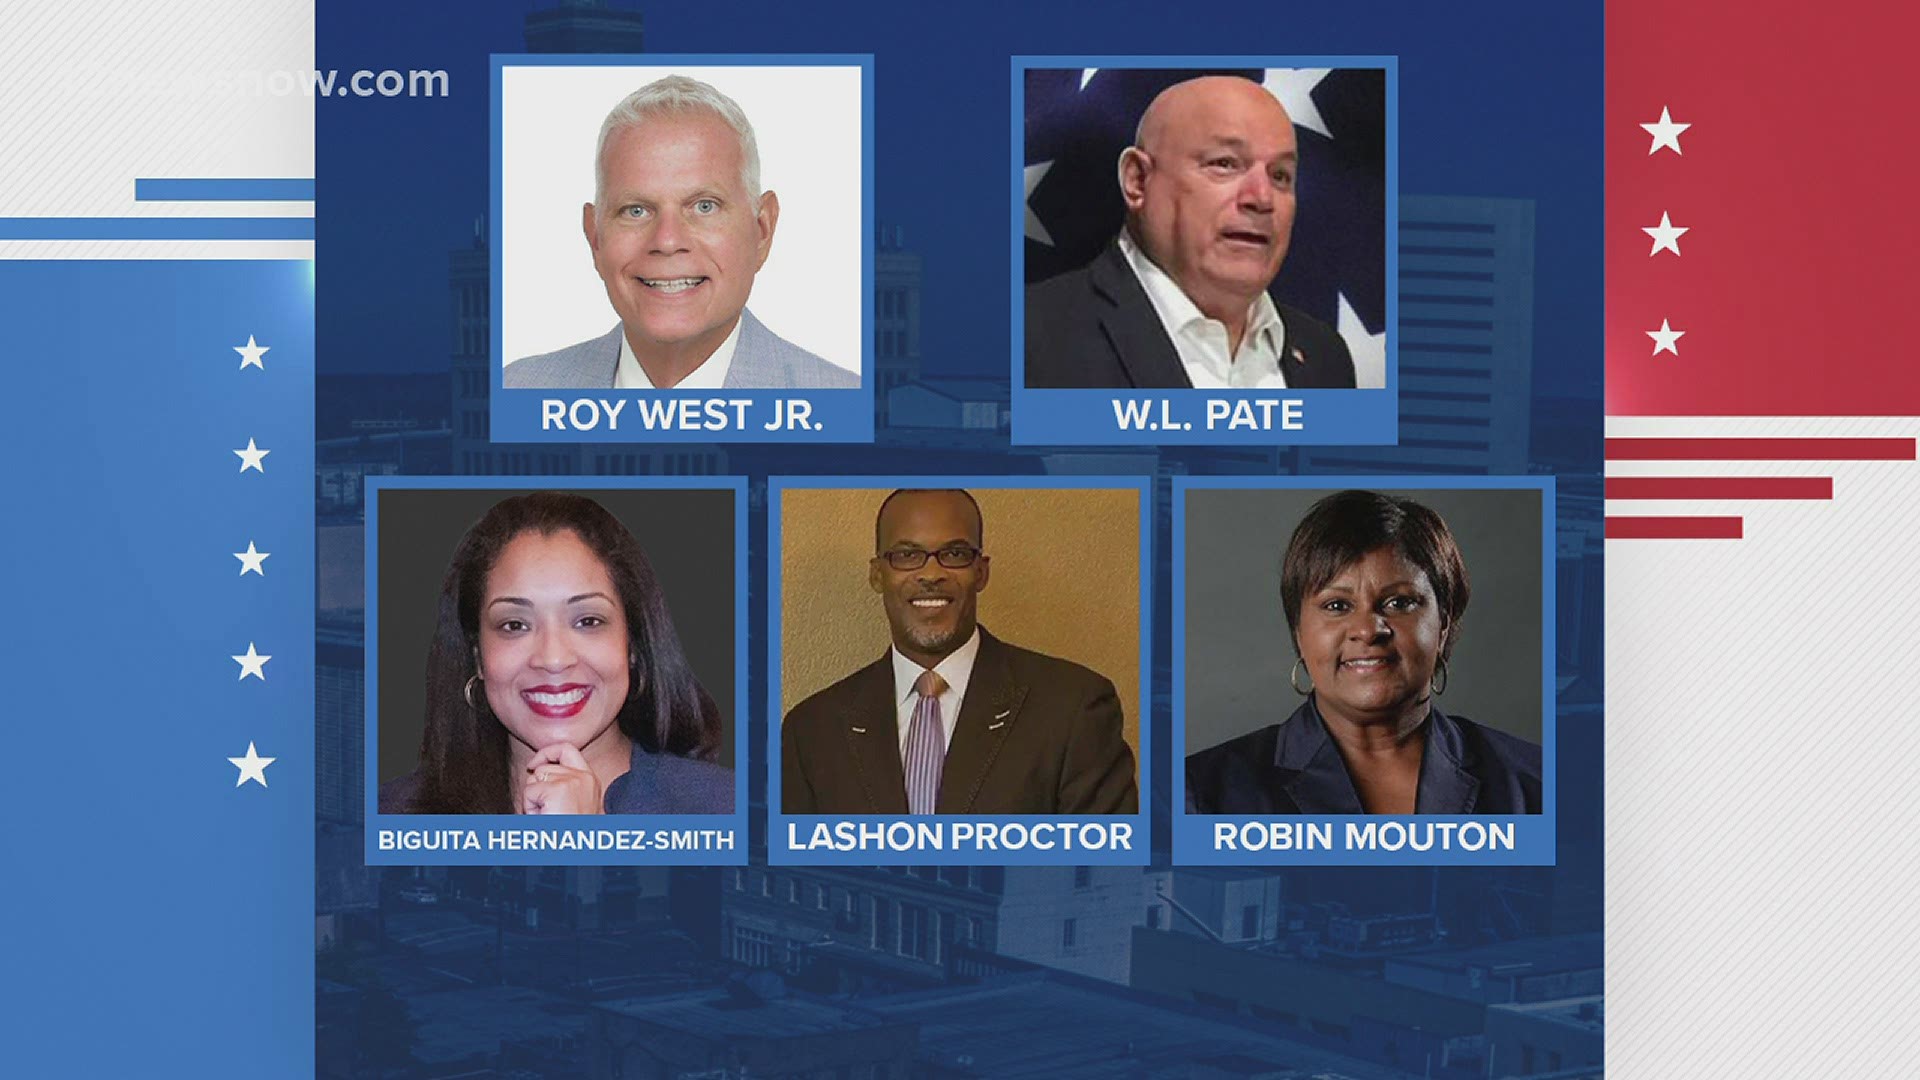 Submit your questions for the Beaumont mayoral candidates by texting "Mayor" to (409) 838-1212.